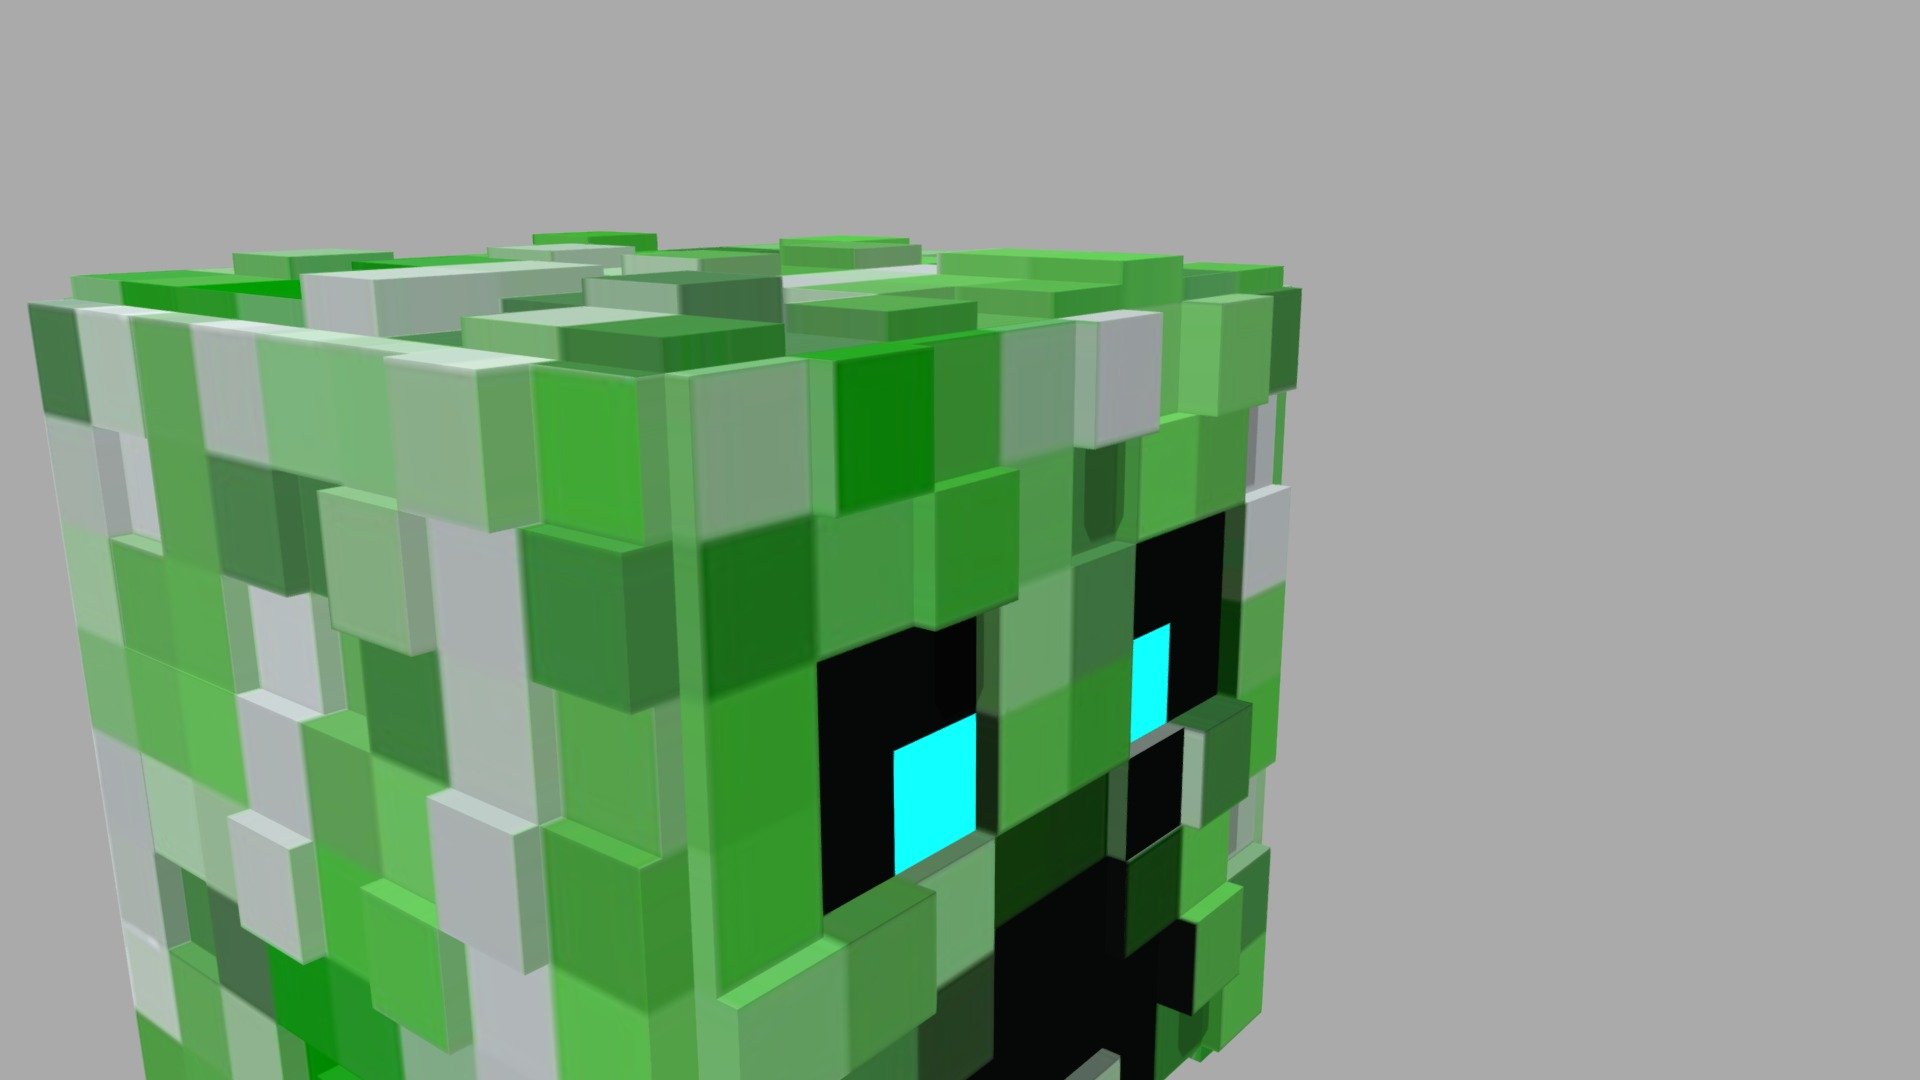 Creeper 3D Models for Free - Download Free 3D ·